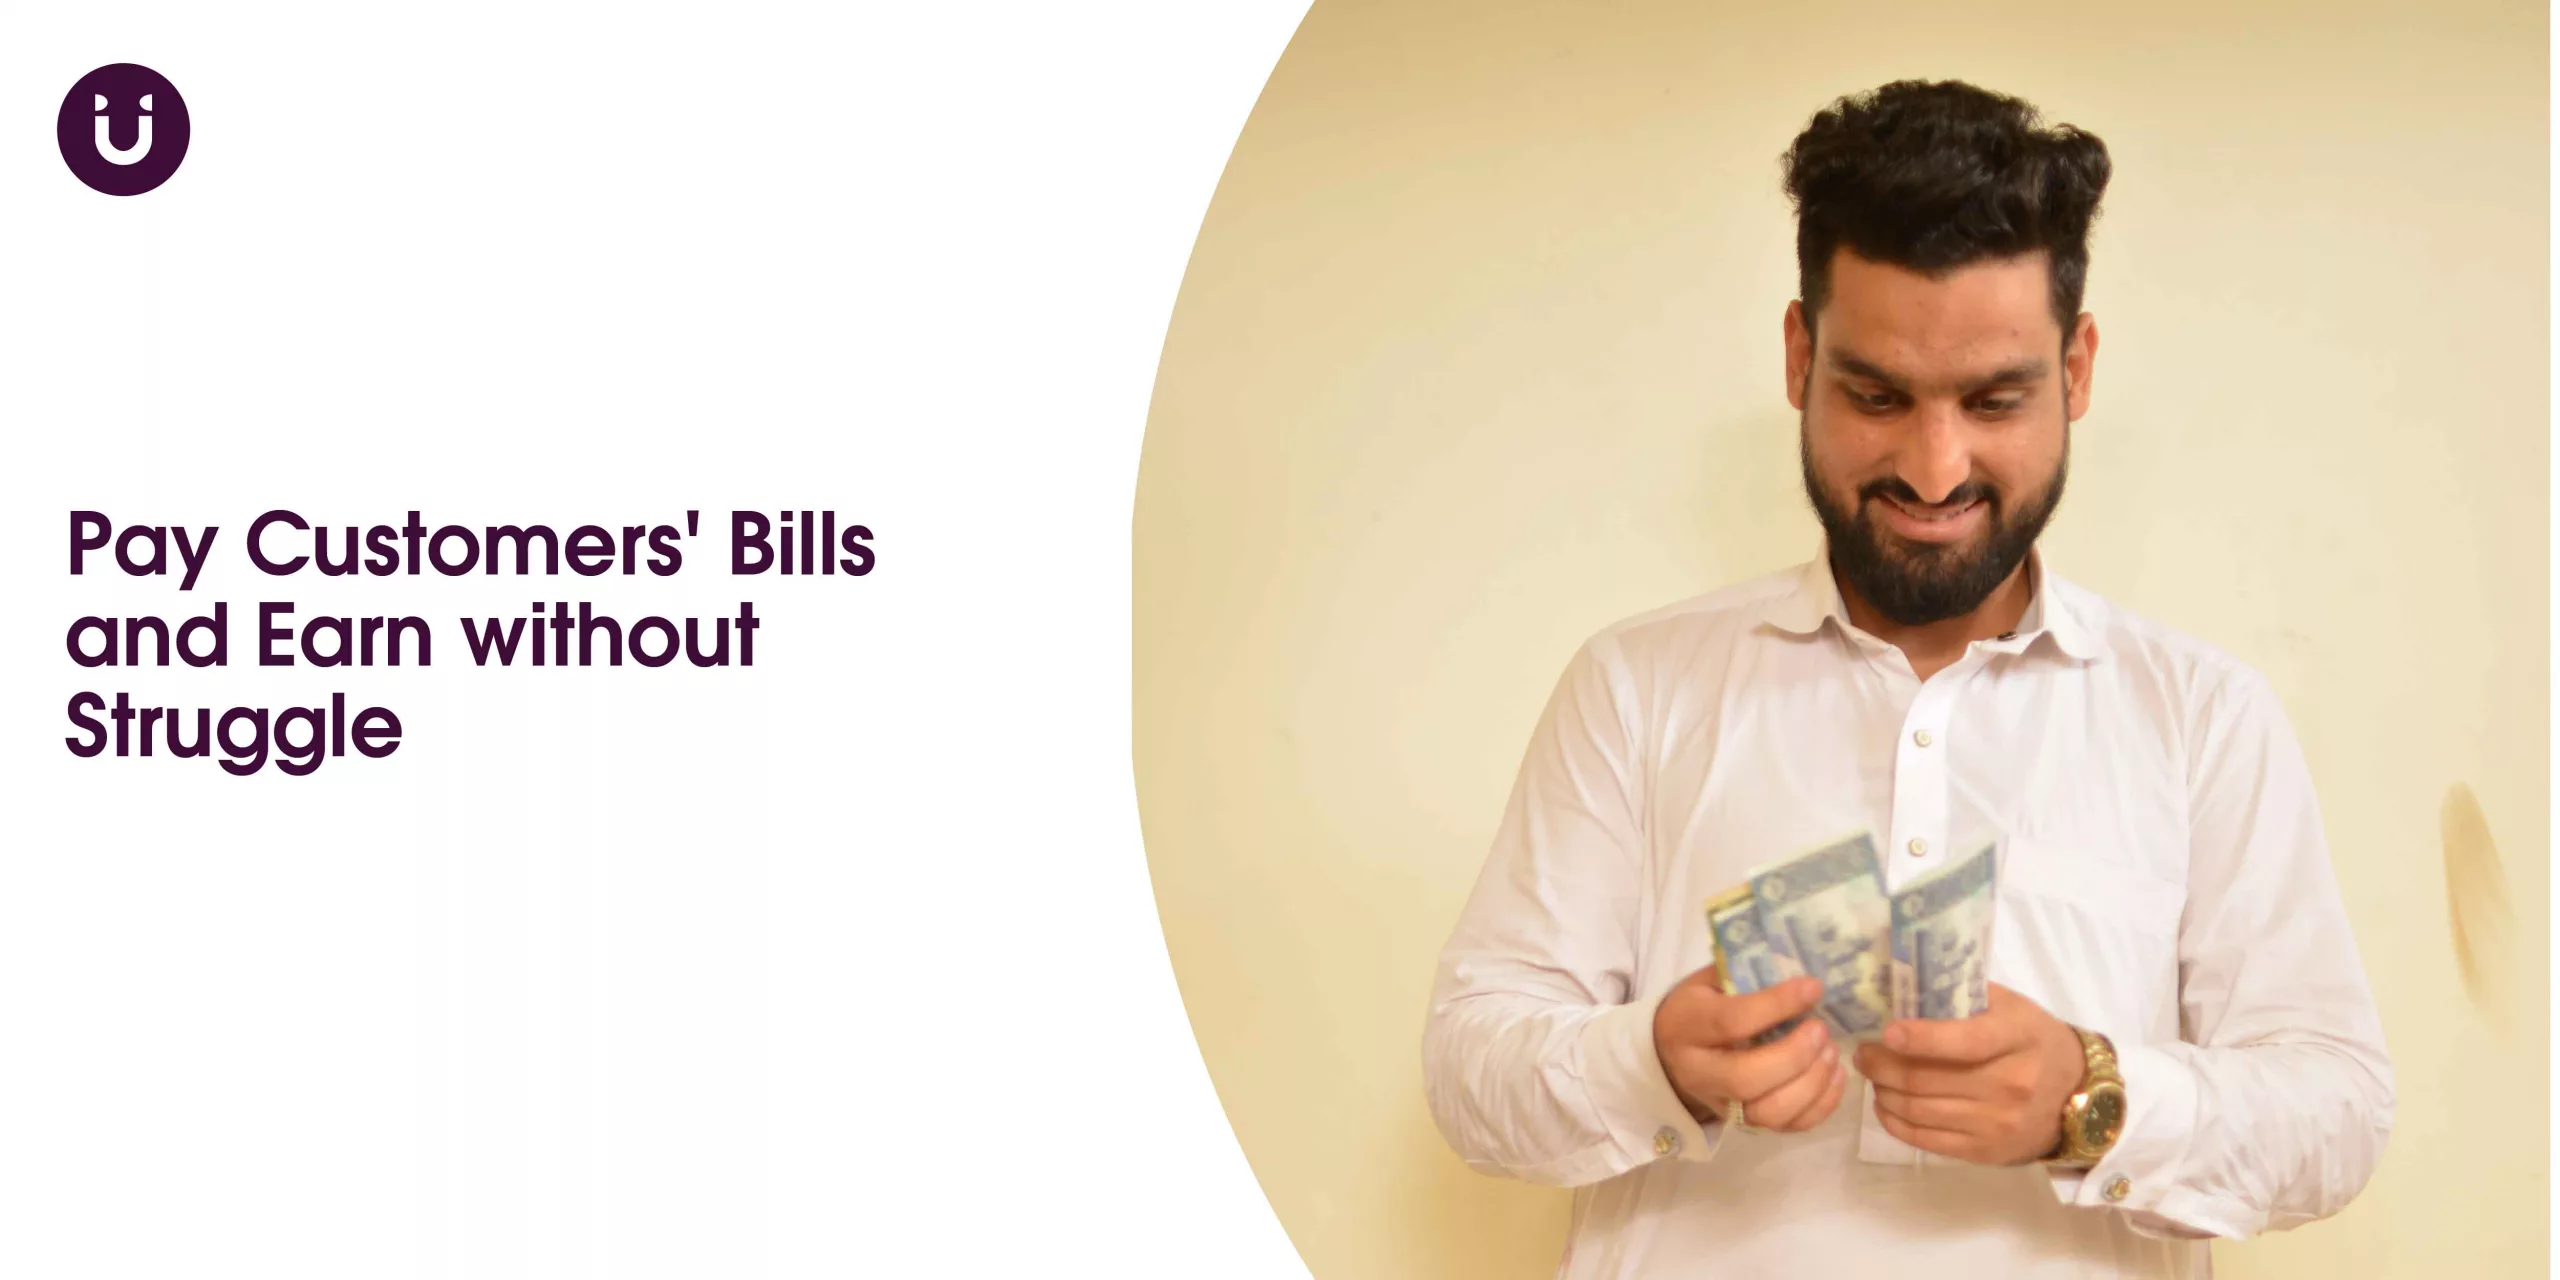 Pay Customers' Bills and Earn without Struggle